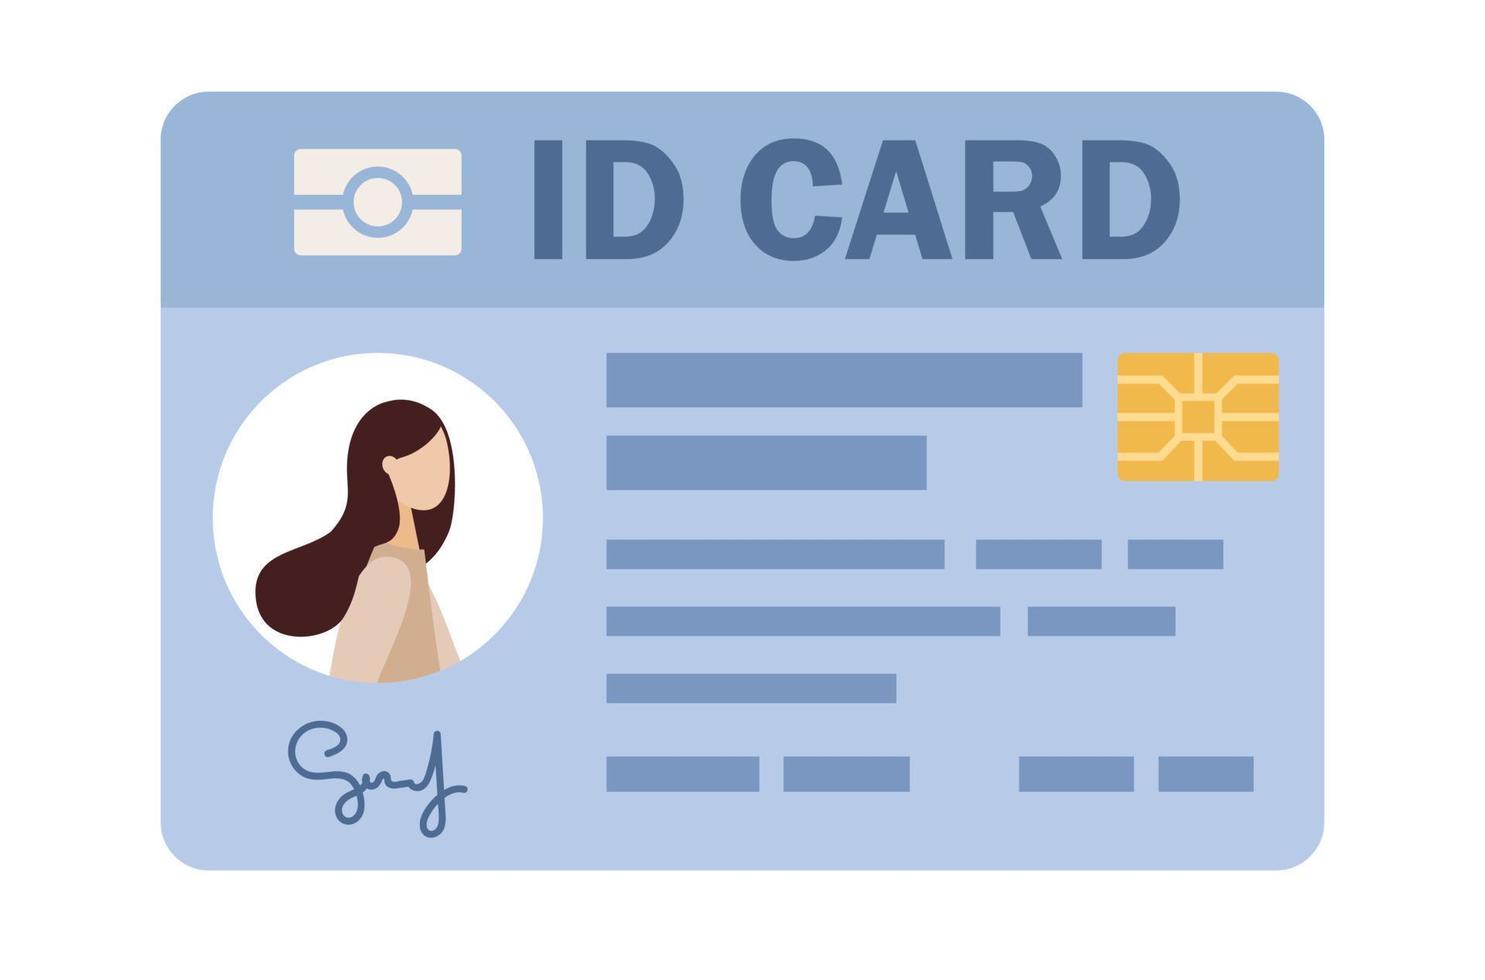 ID card icon. Identification document with person photo. Personal info data. Vector flat illustration